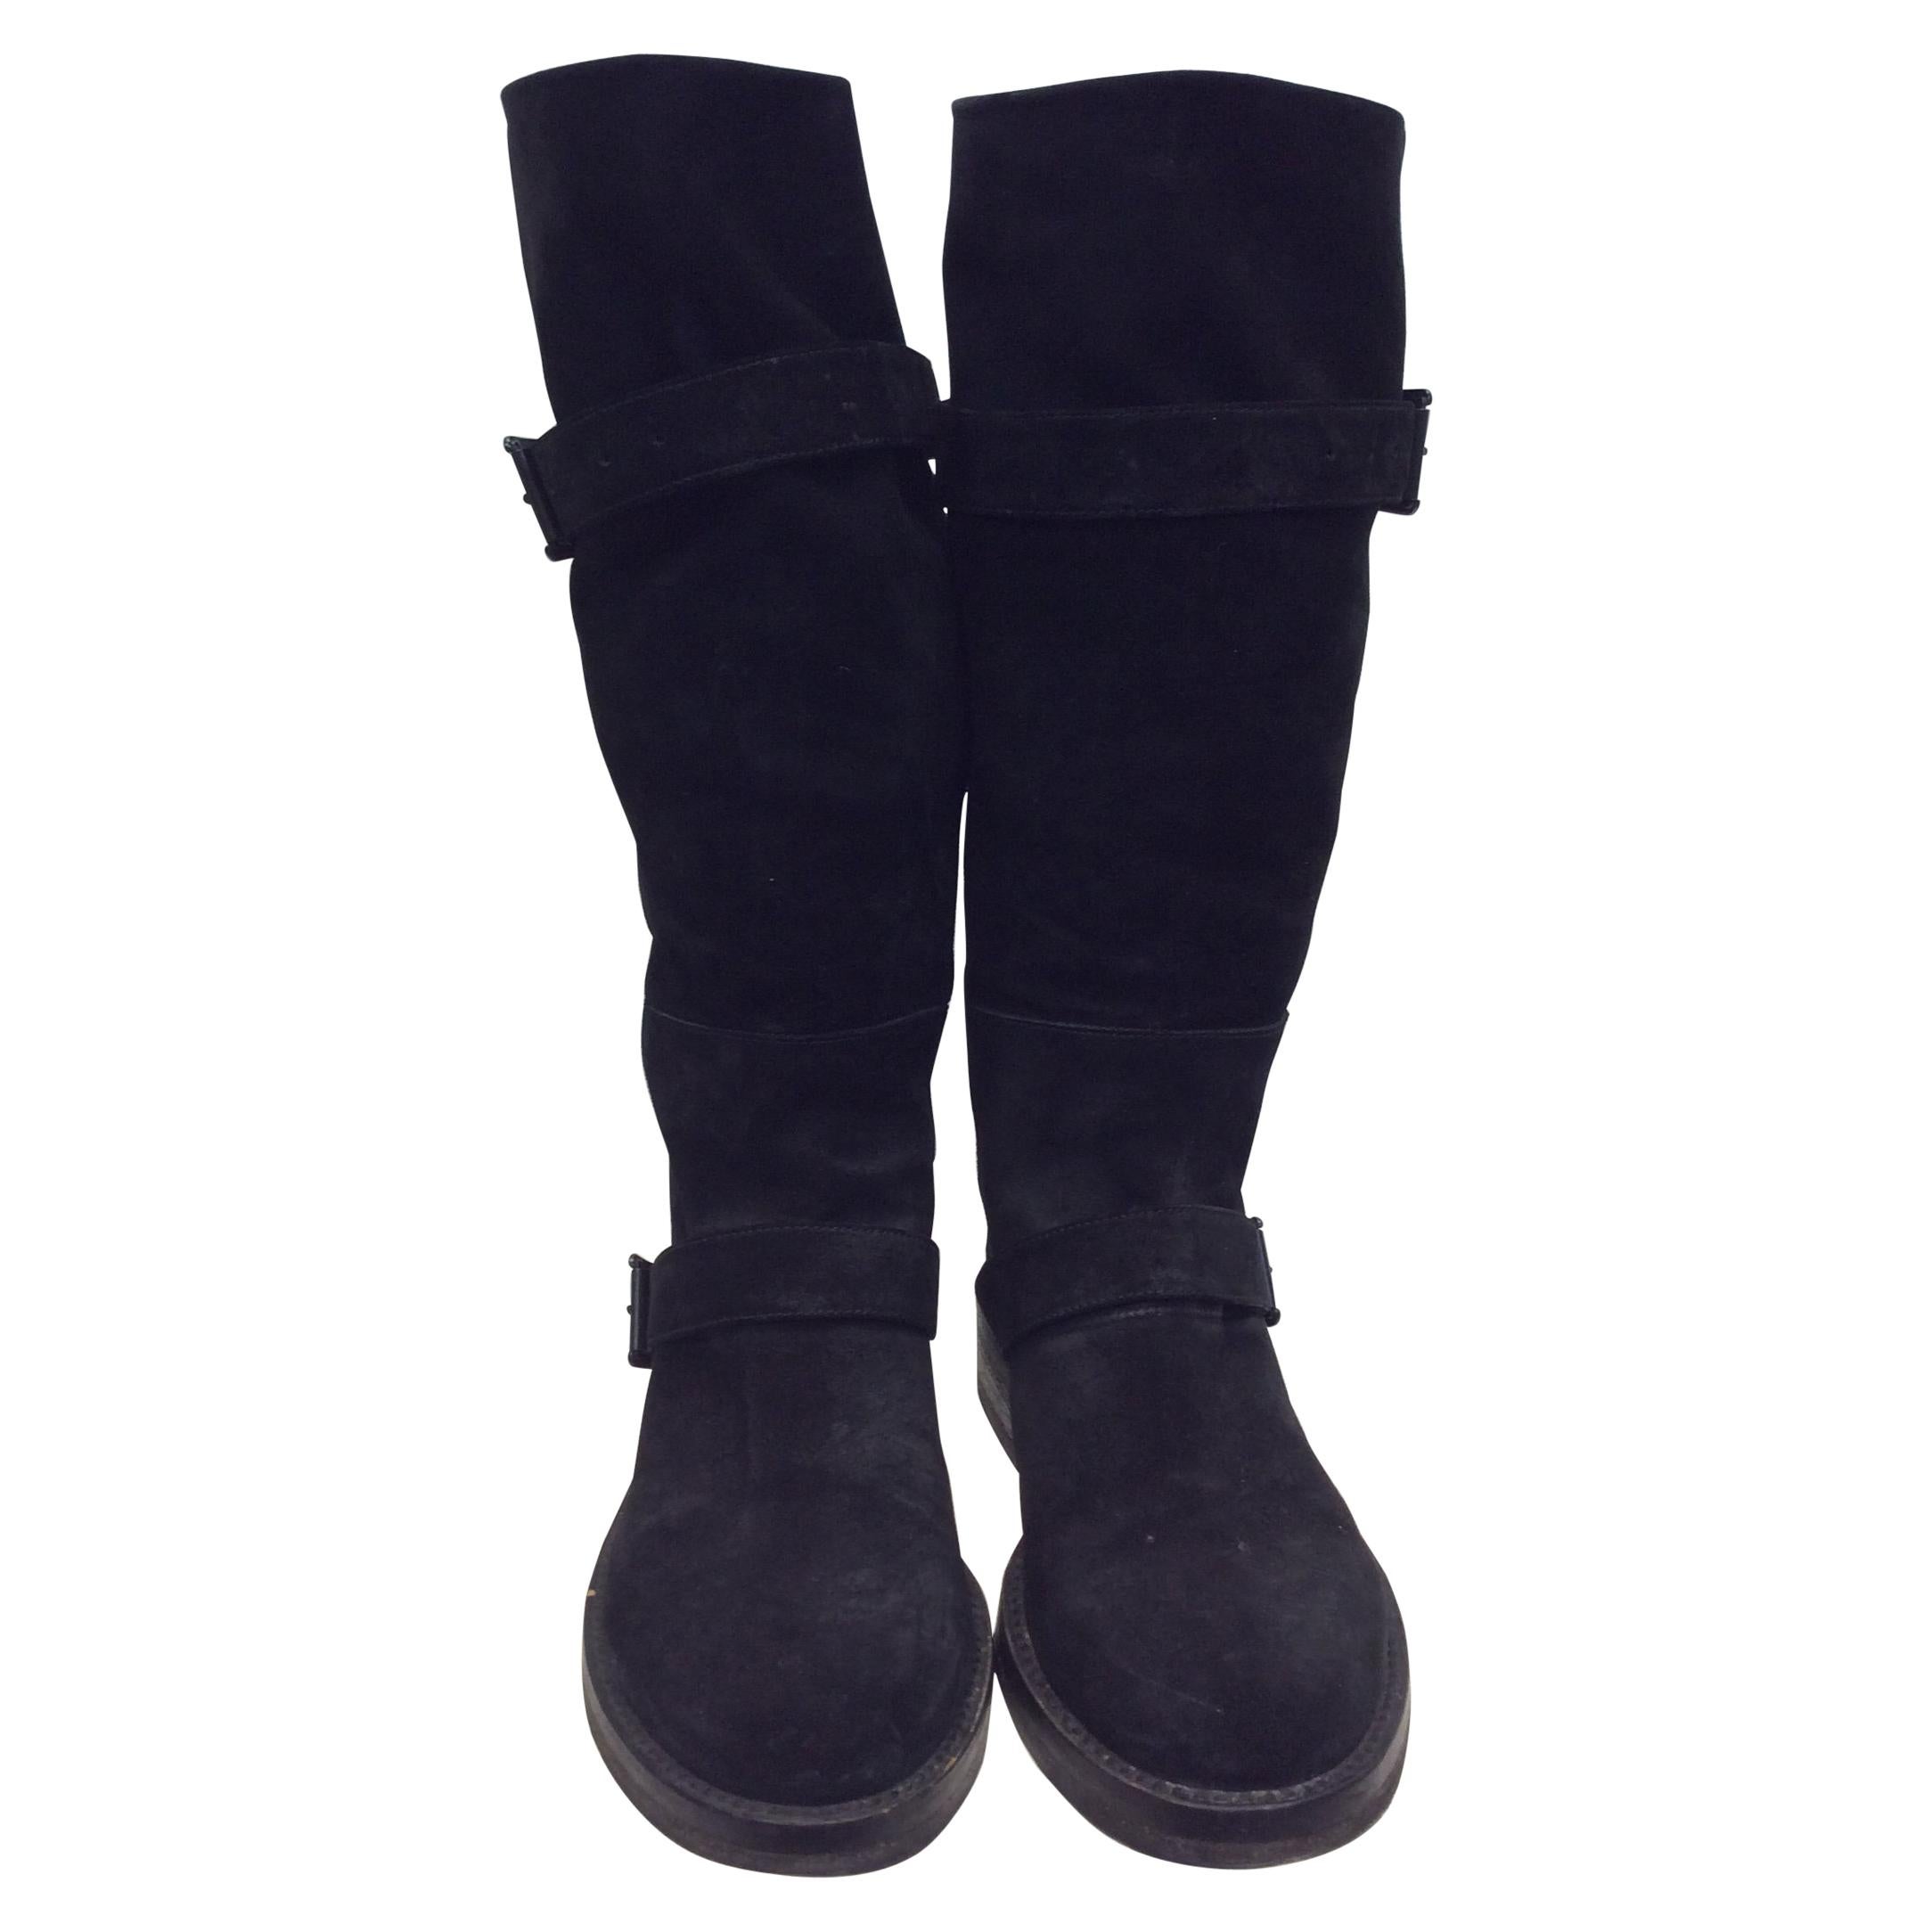 Ann Demeulemeester Black Suede Knee-High Boots For Sale